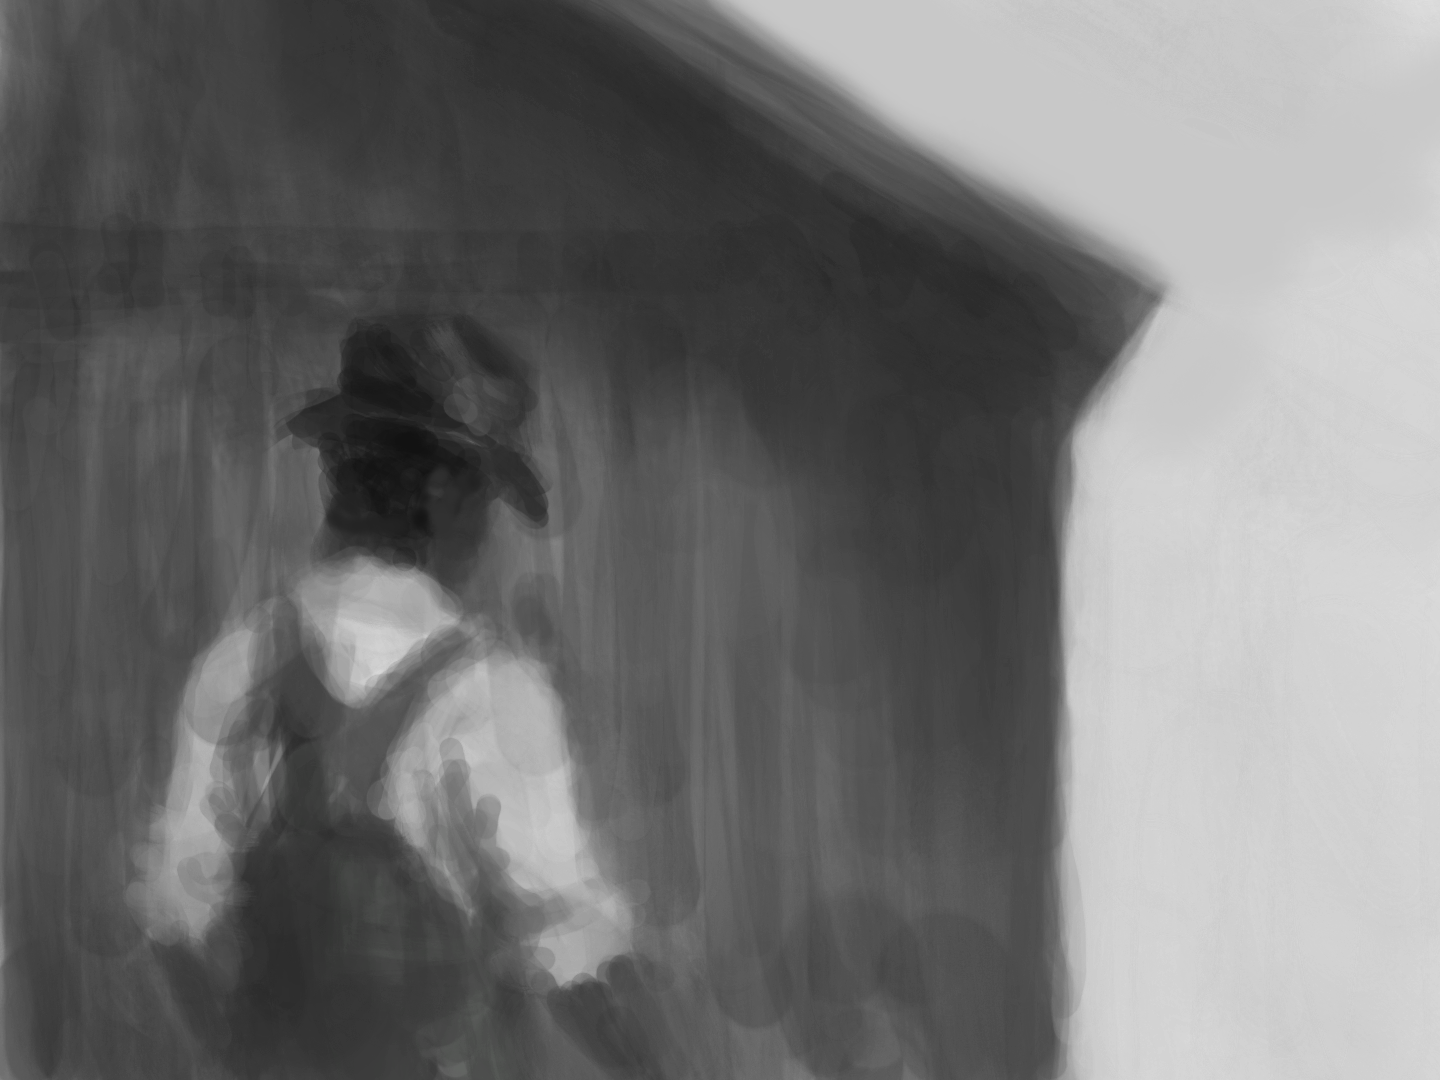 Value study 1 final.png